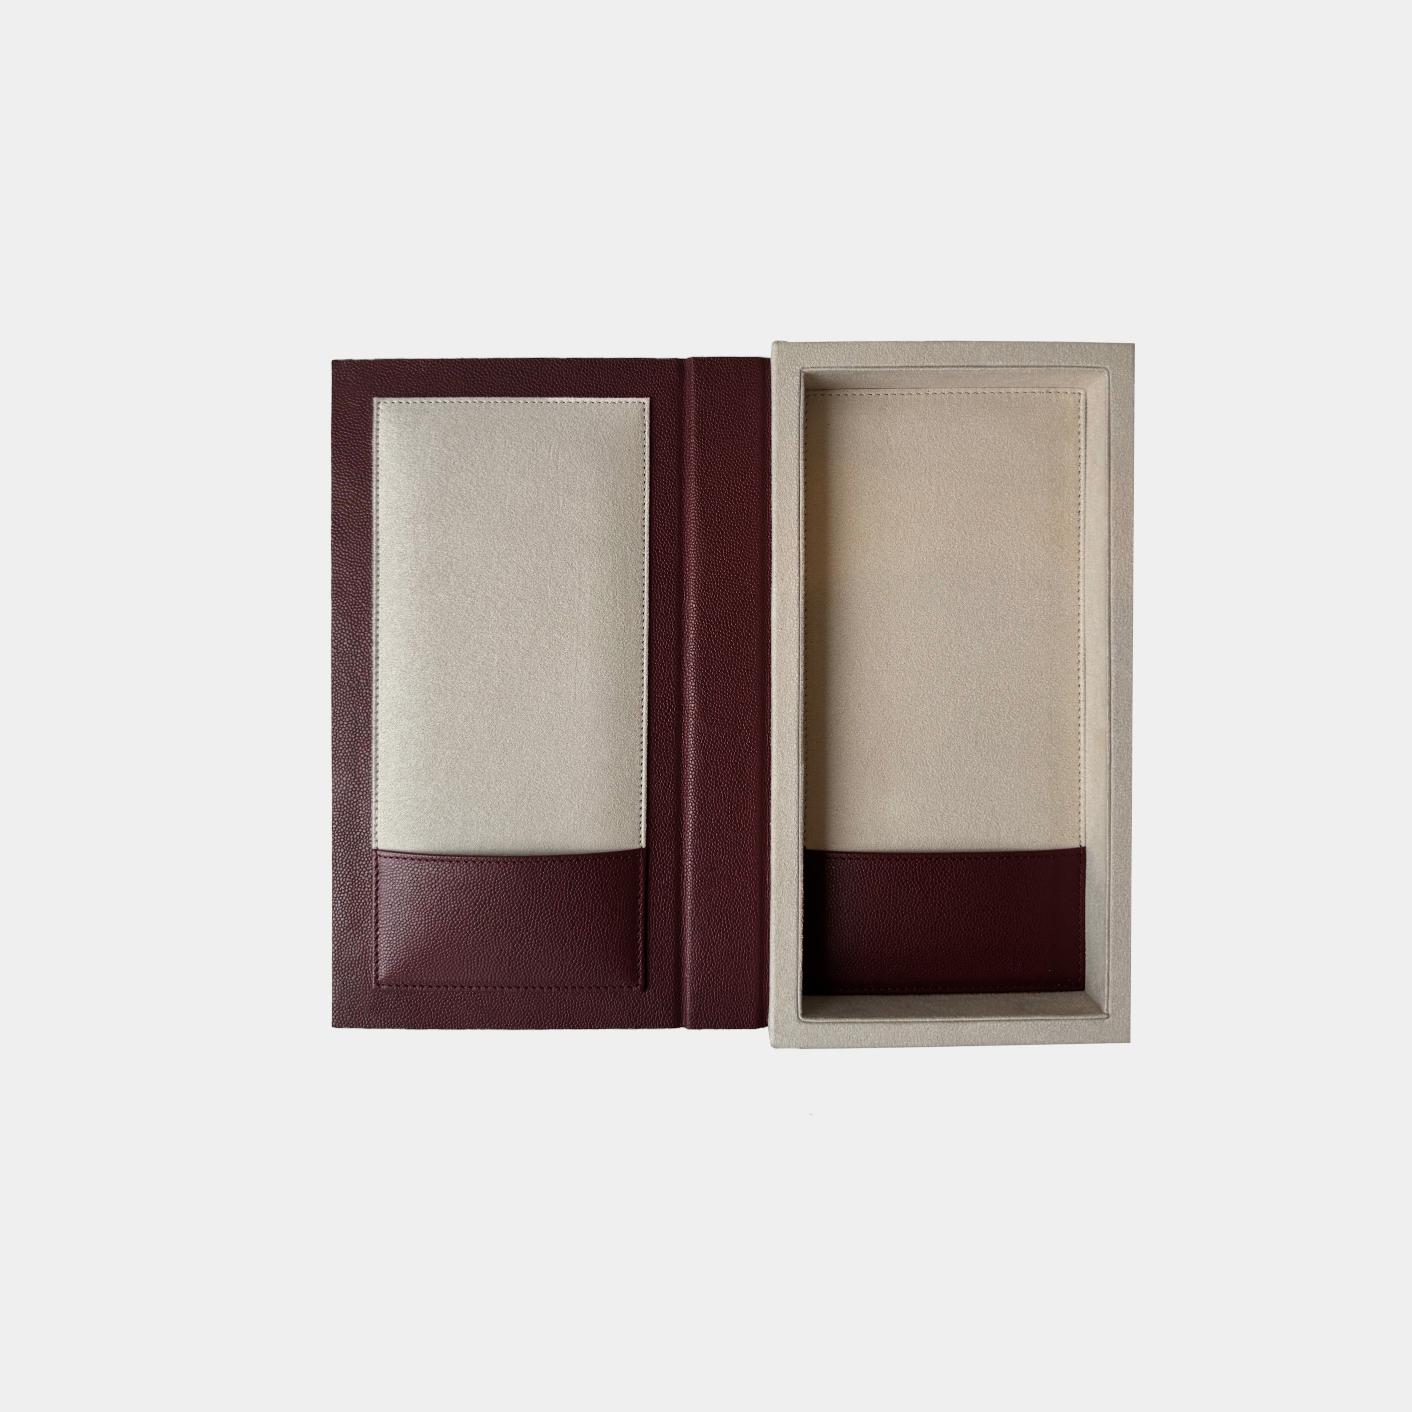 Bill presentation box made of leather with two-tone leather and slip pockets